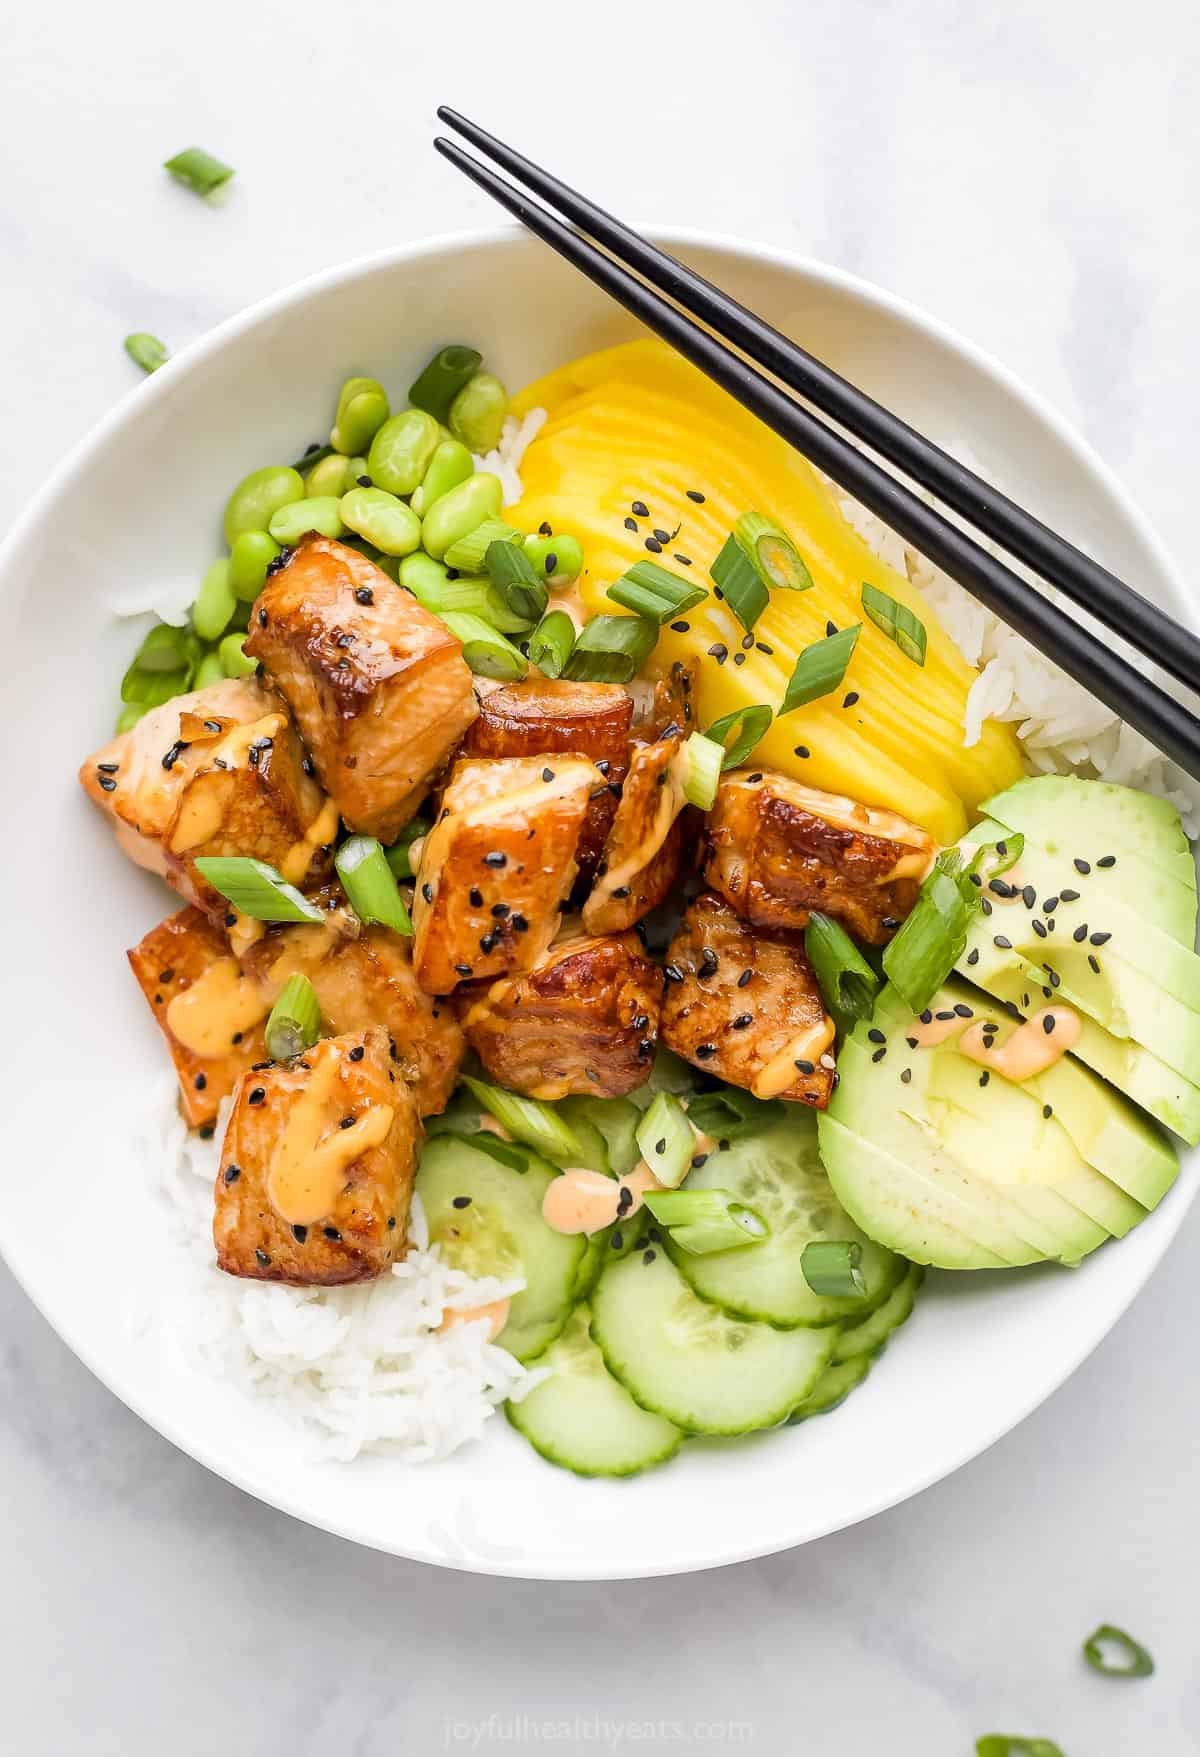 A close-up s،t of a rice bowl with fish, mango, avocado, cu،ber and more